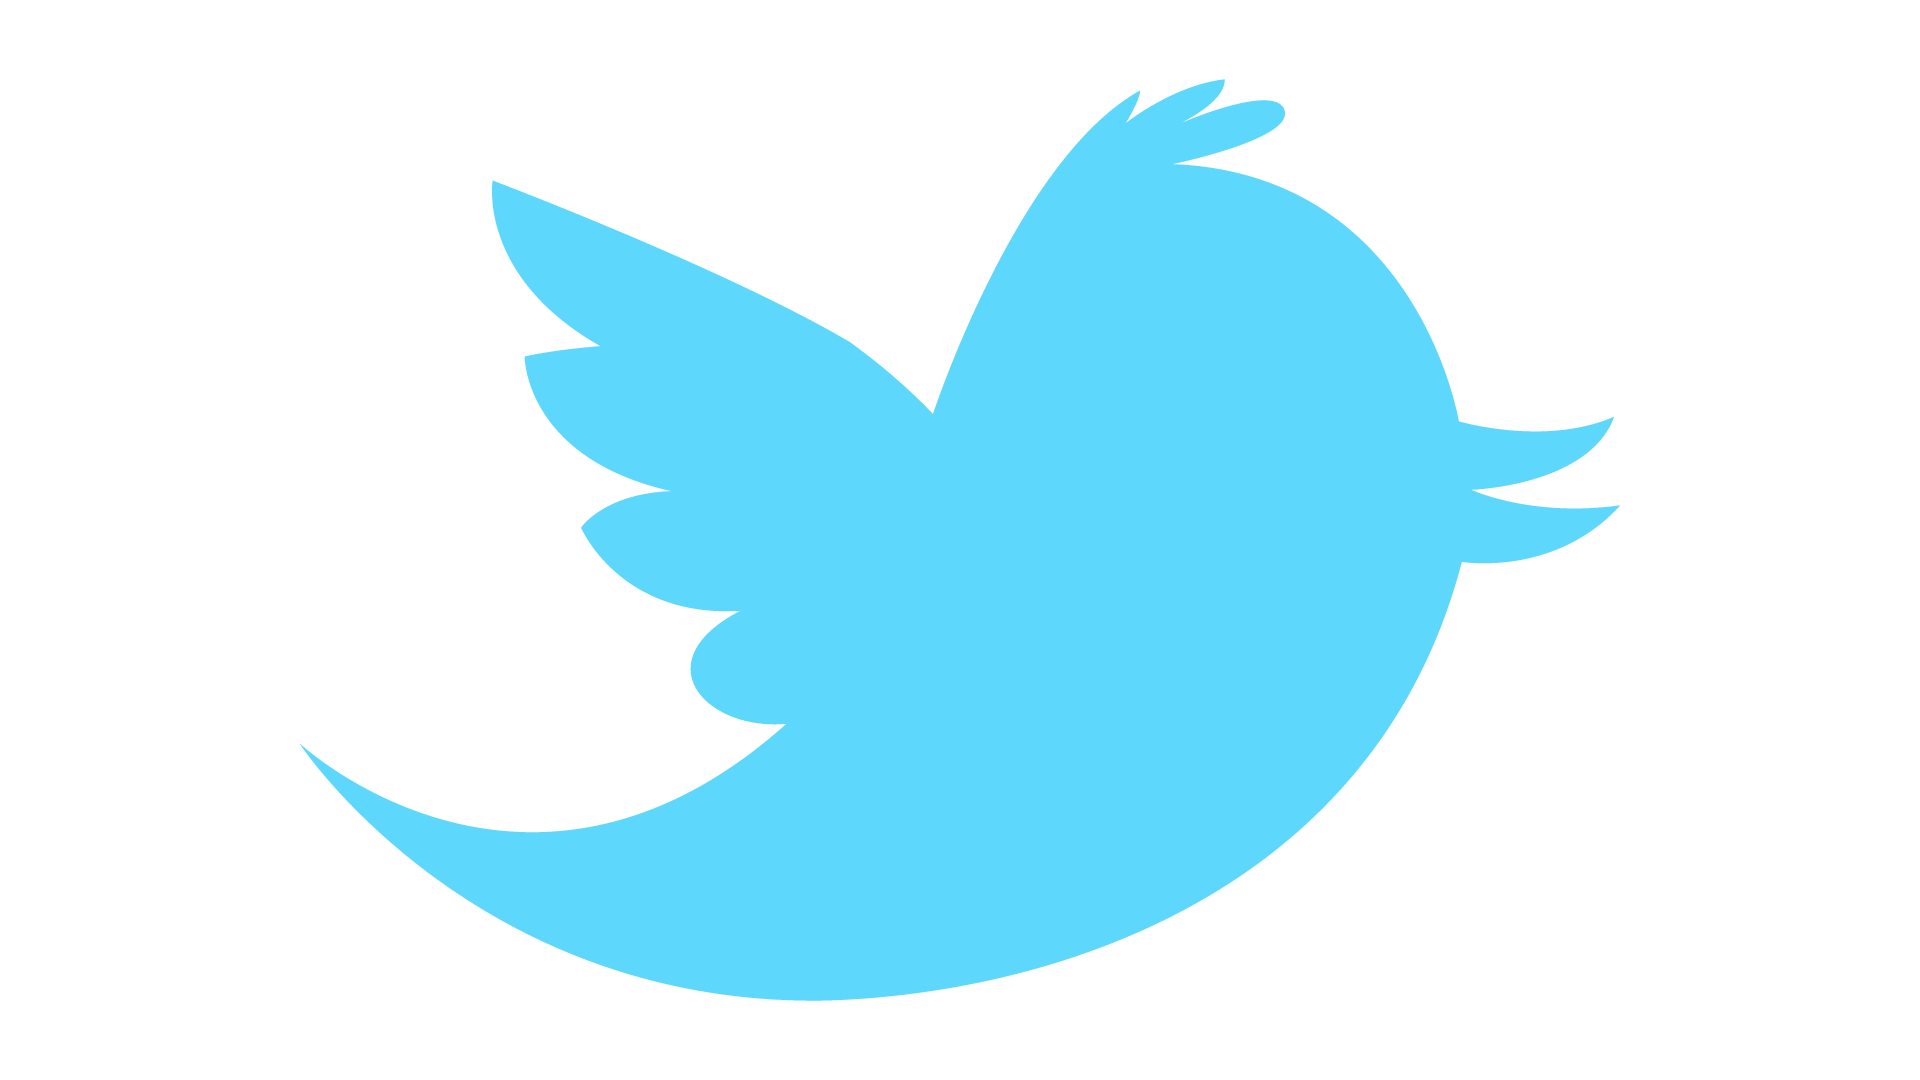 12 Twitter Bird Icon Vector Images